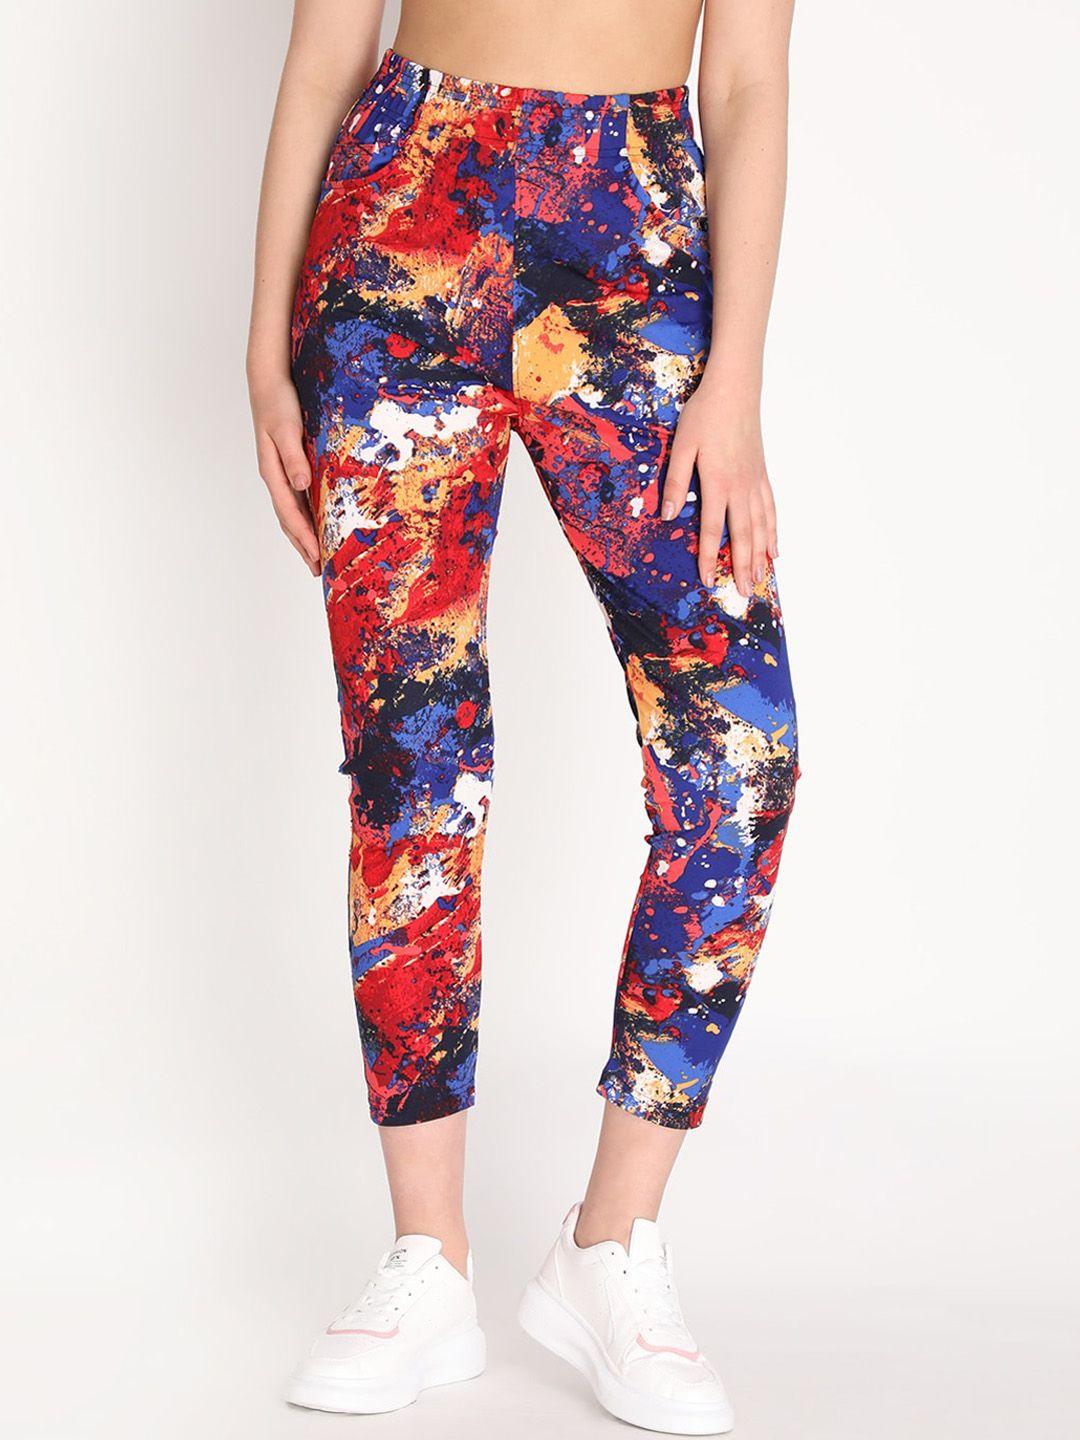 chkokko-women-red-&-blue-printed-training-or-gym-track-pants